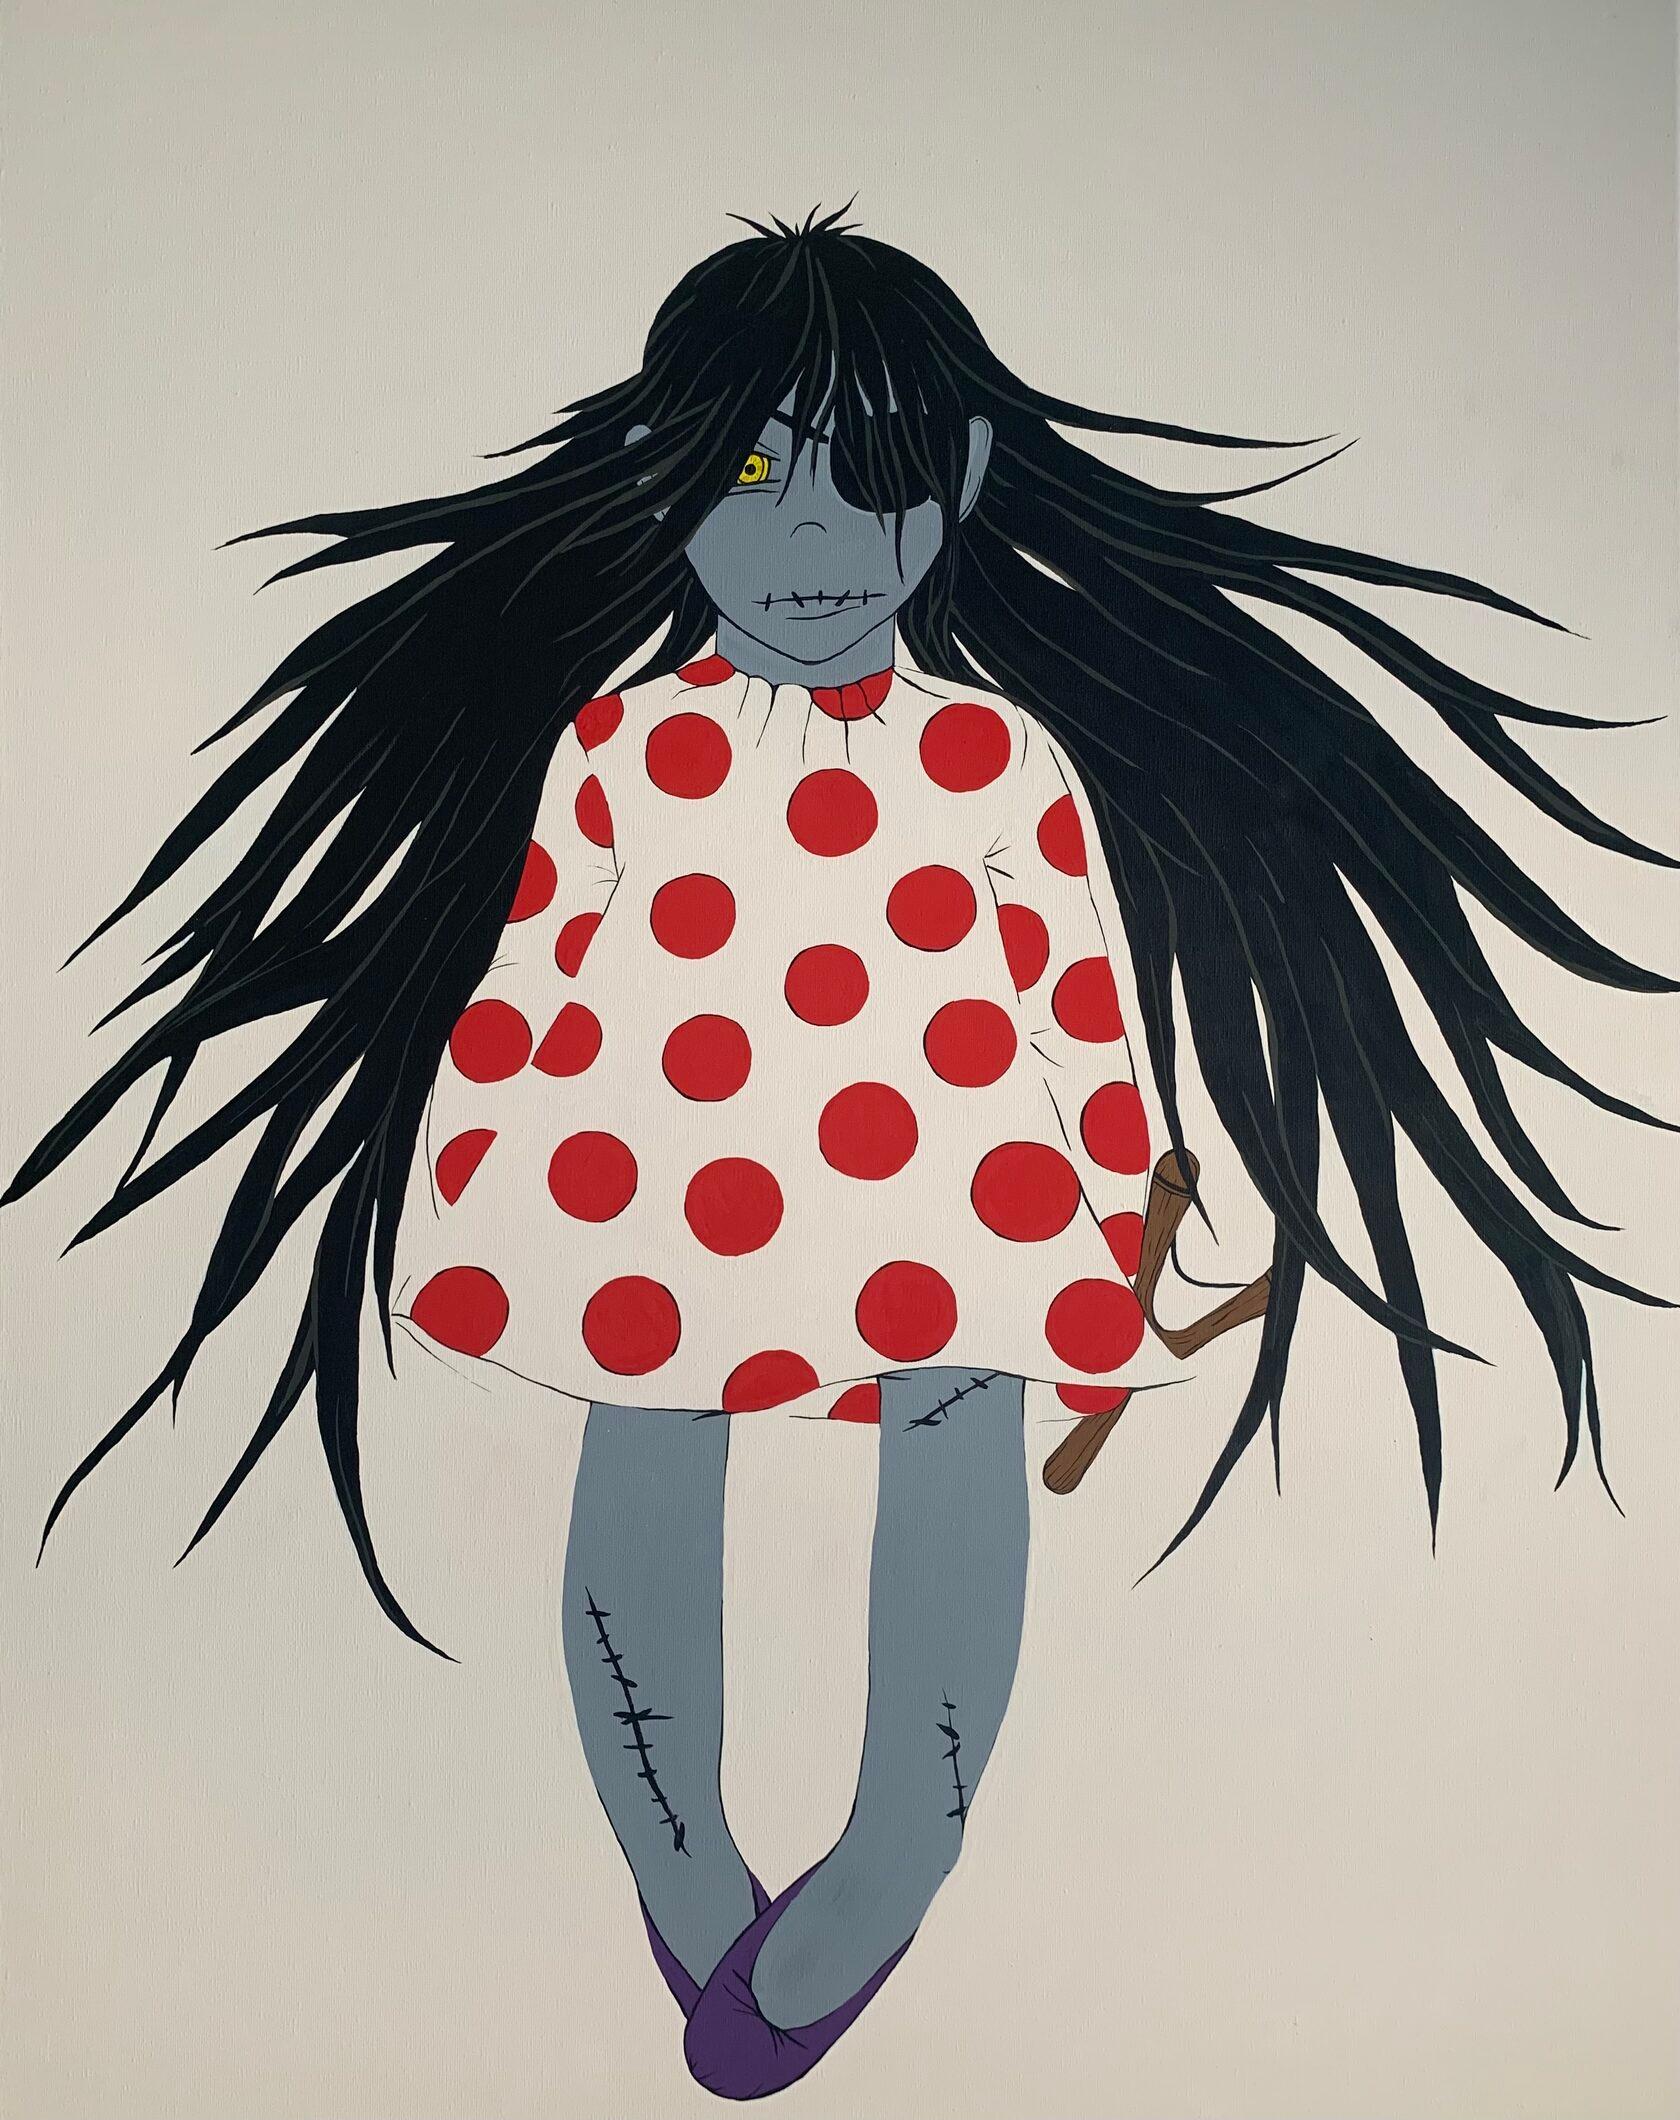 Zombie girl and slingshot, 90x70cm - Painting by Zombie Girl 